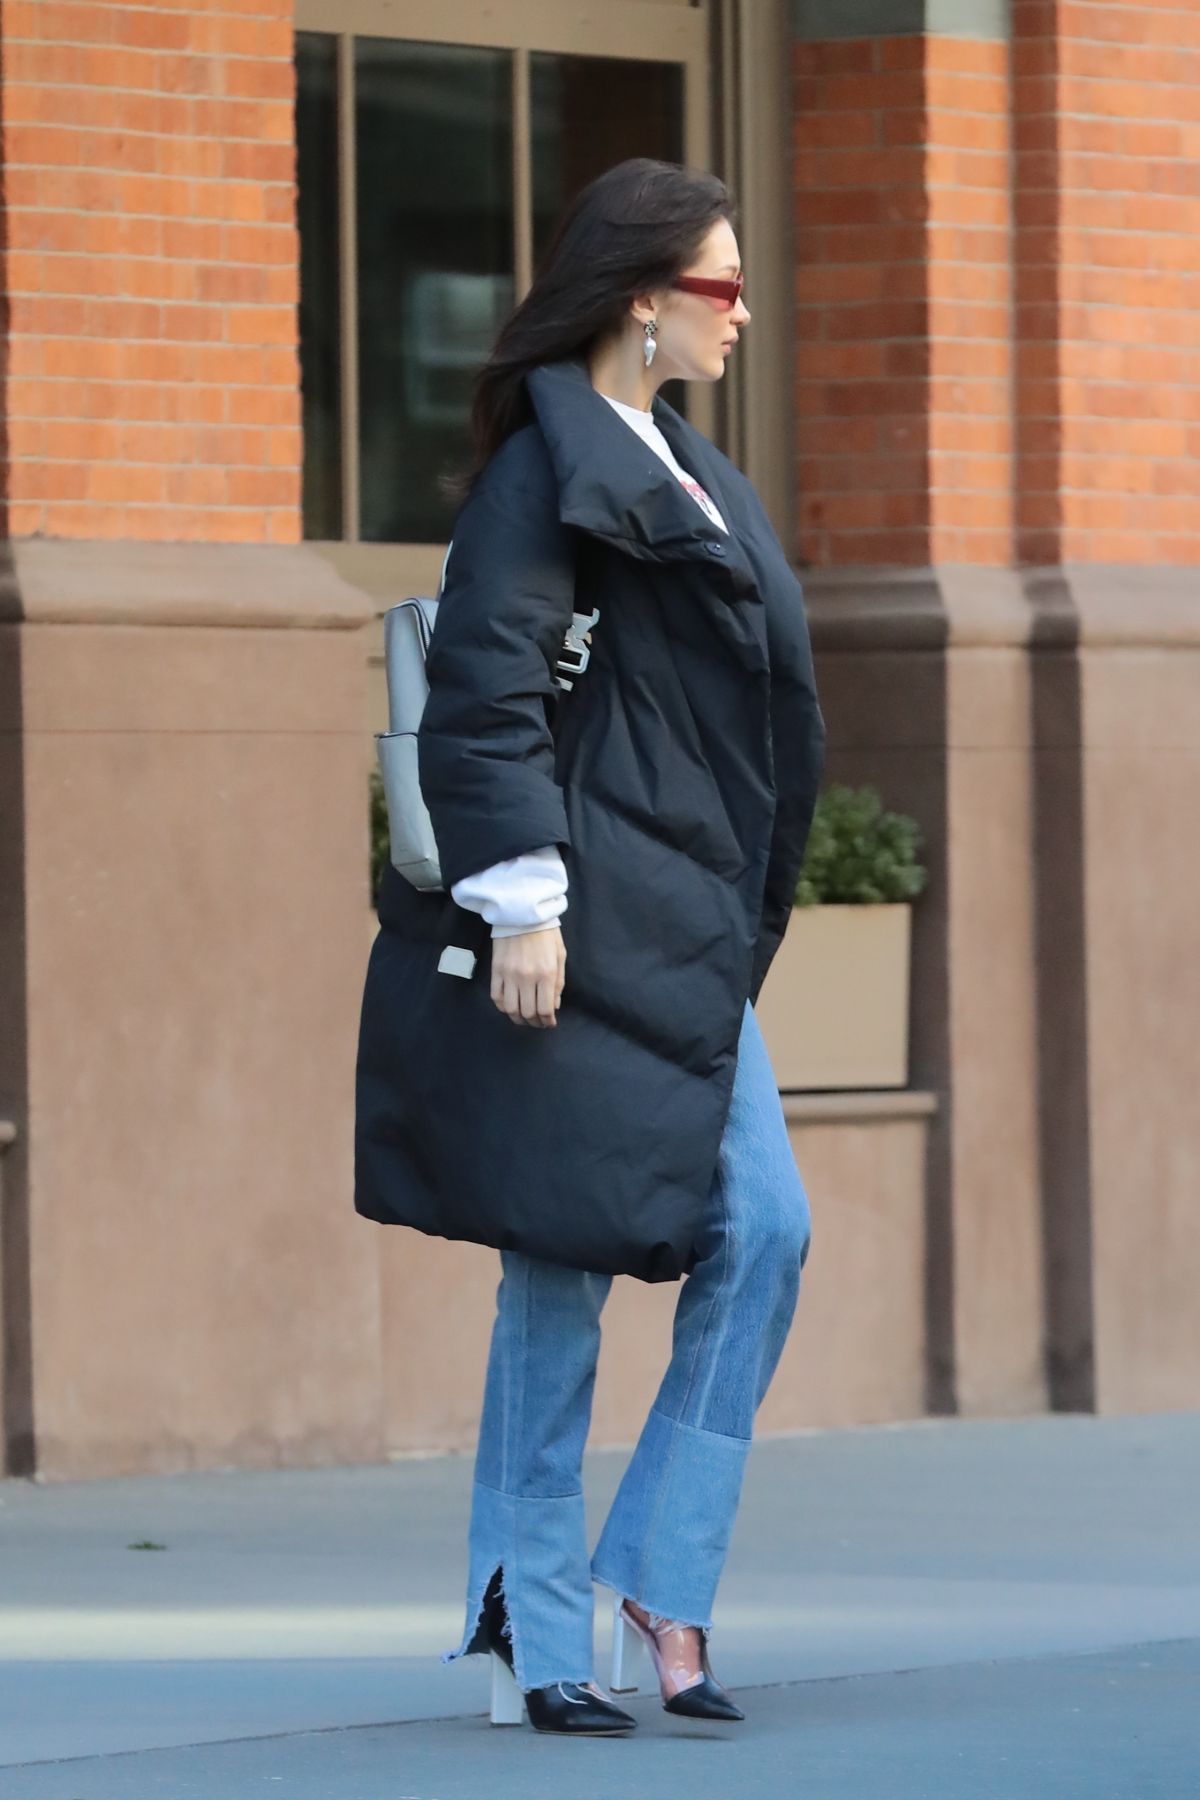 bella-hadid-out-and-about-in-new-york-03-19-2019-1.jpg